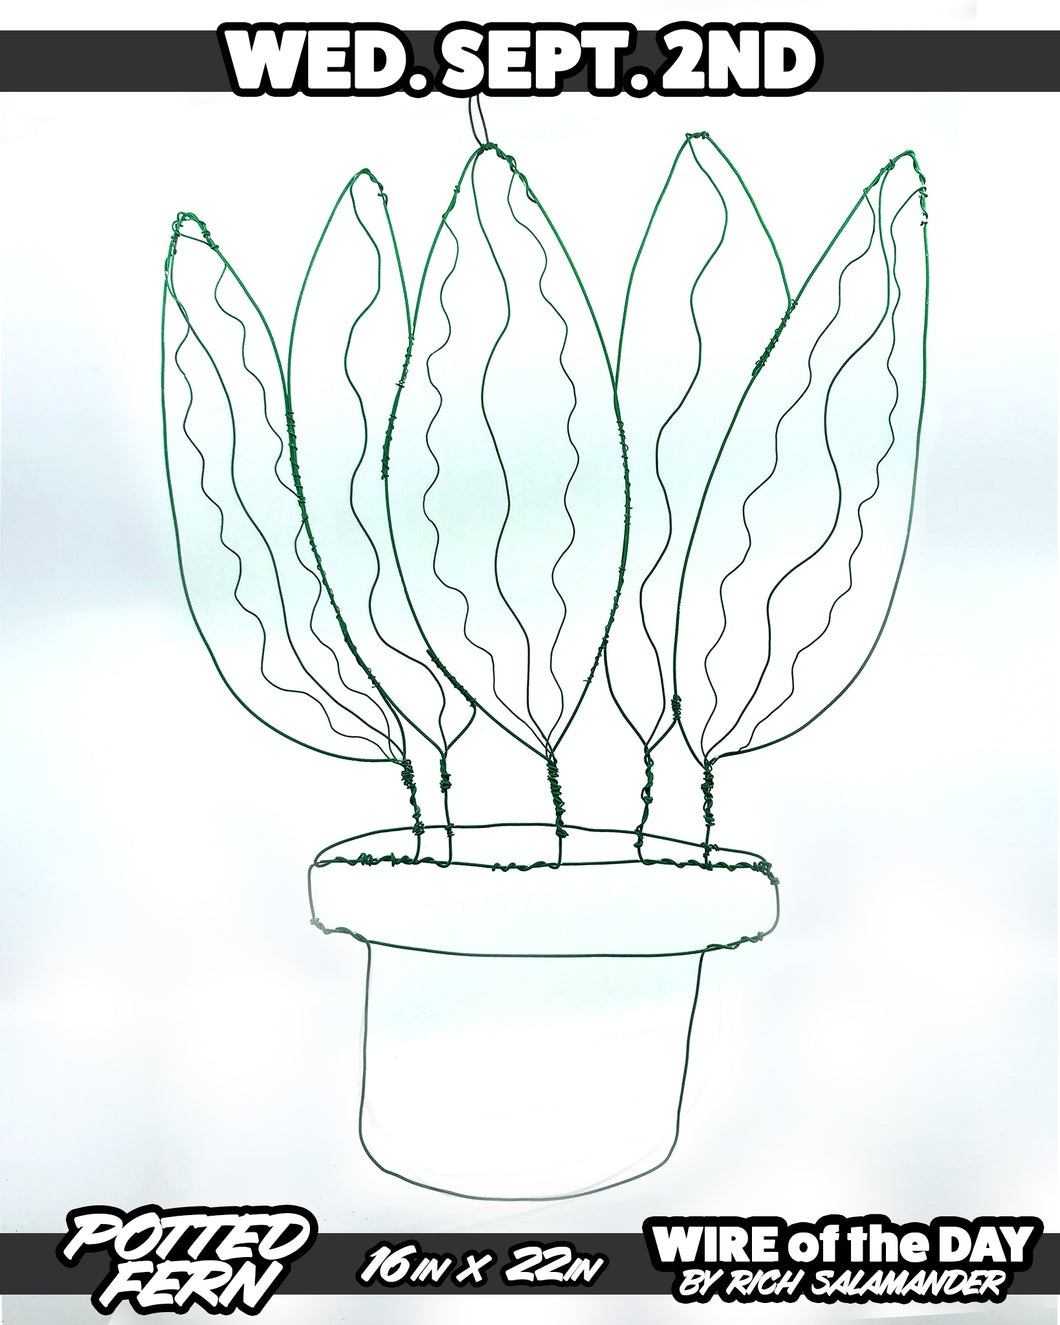 WIRE of the DAY POTTED FERN